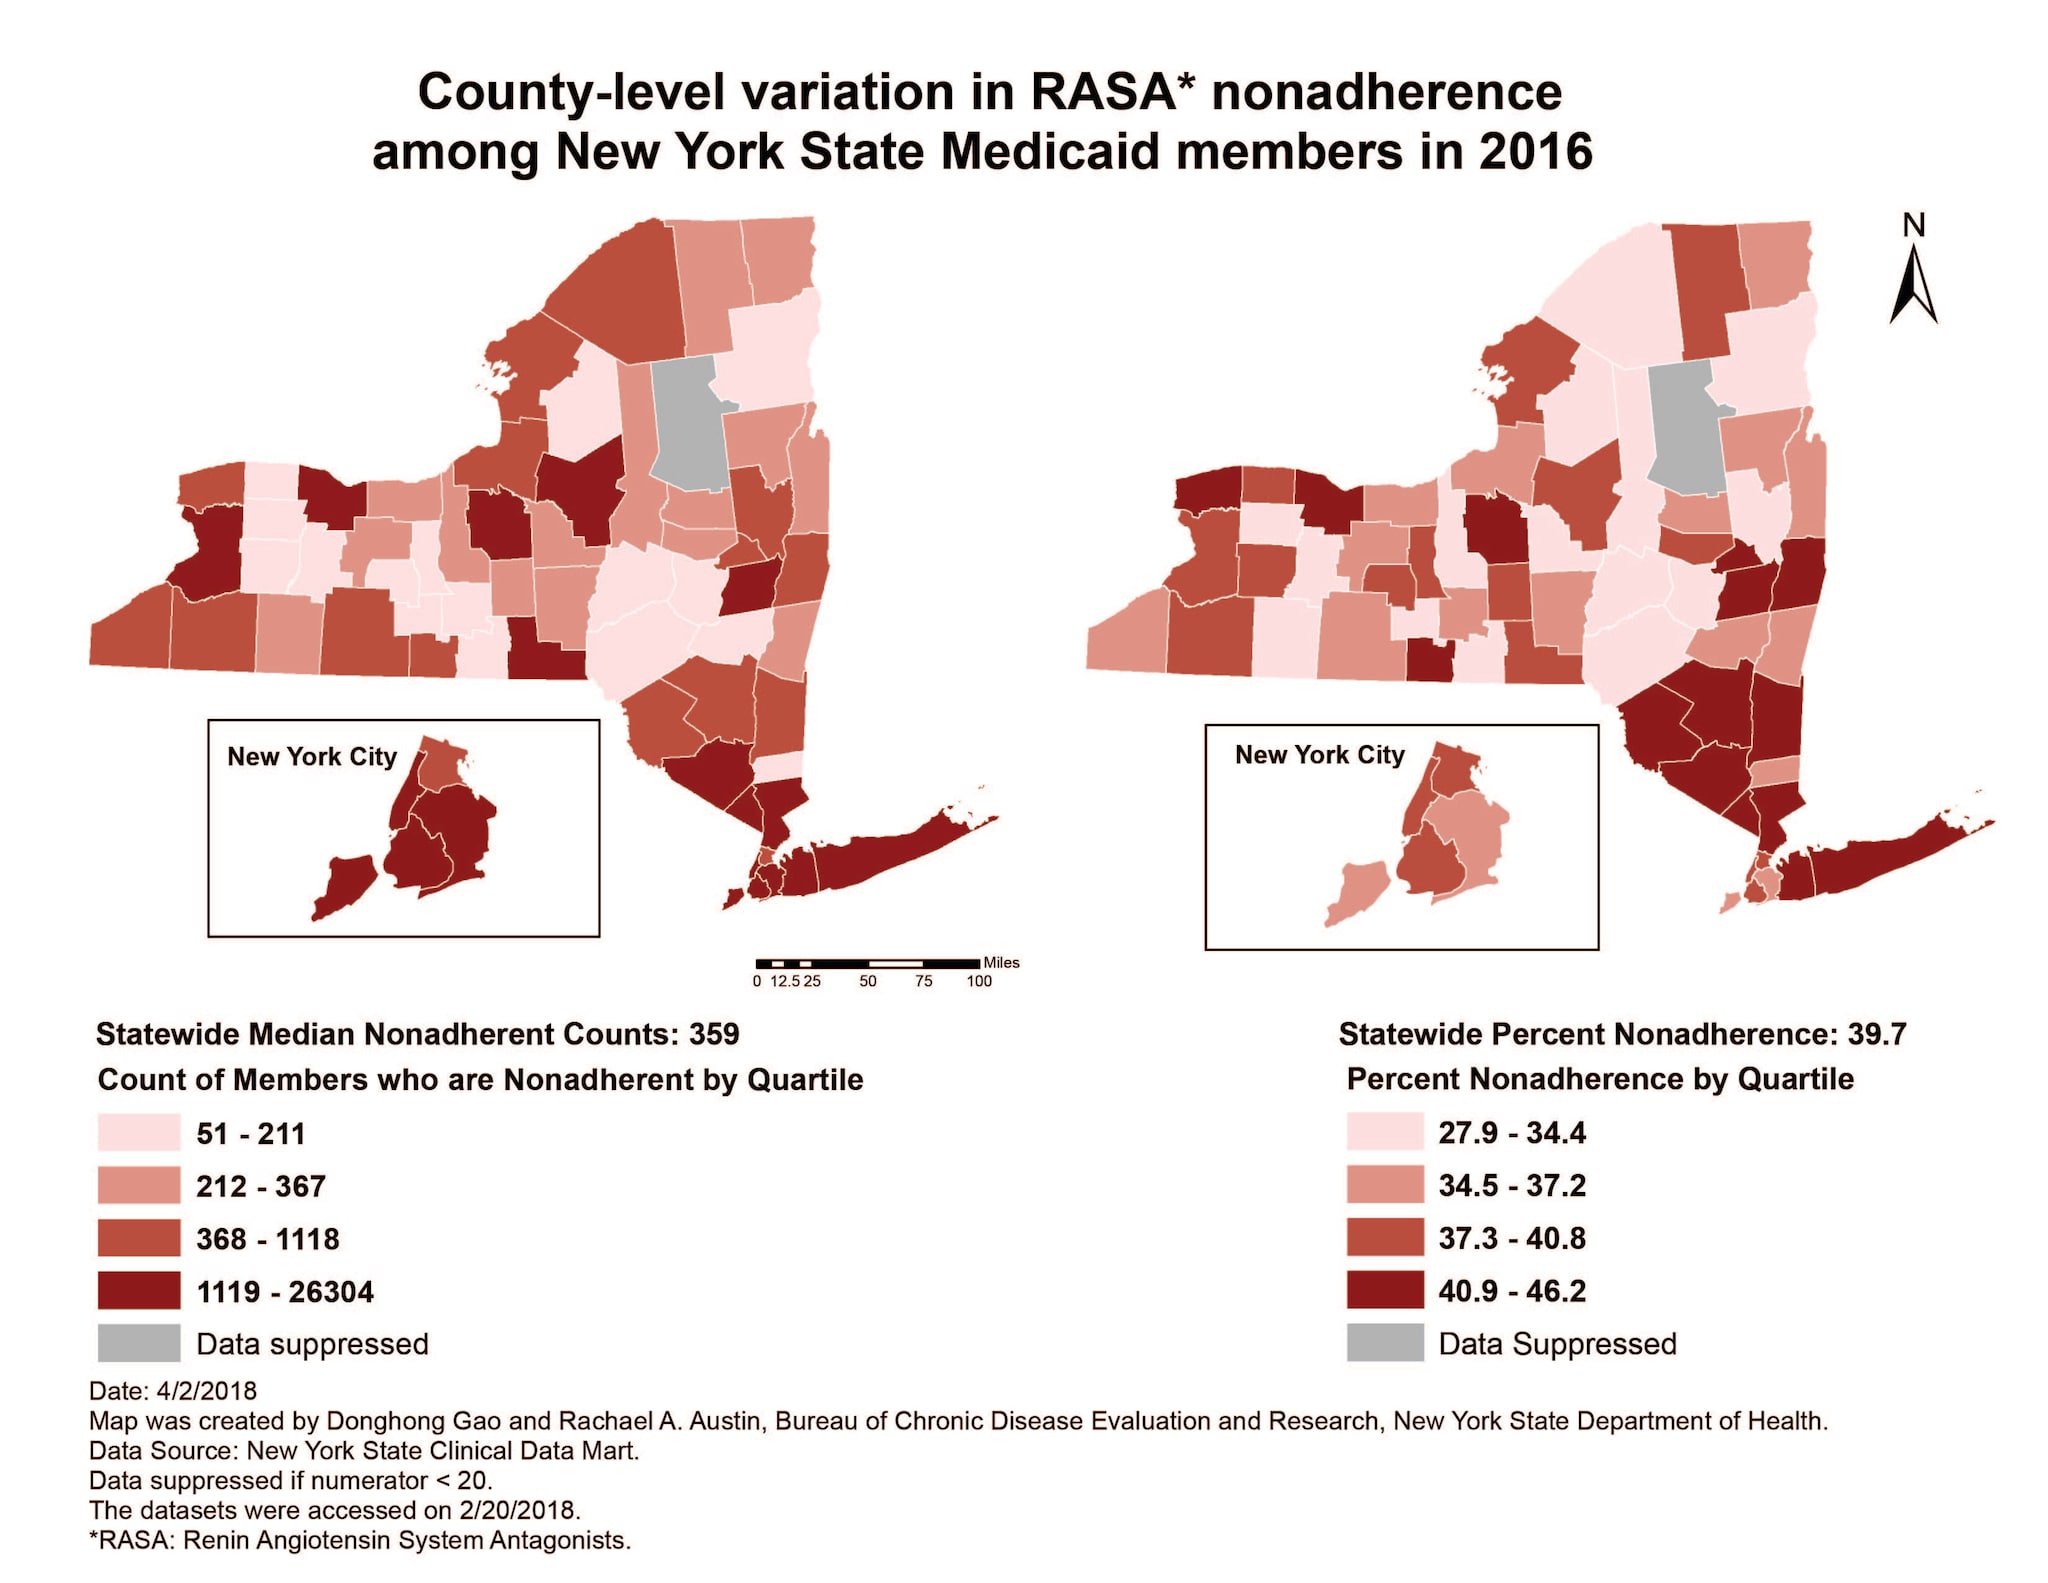 This map highlights geographic differences in the percent of RASA nonadherence among Medicaid members, as well as the count of Medicaid members who are identified as being nonadherent to RASAs.